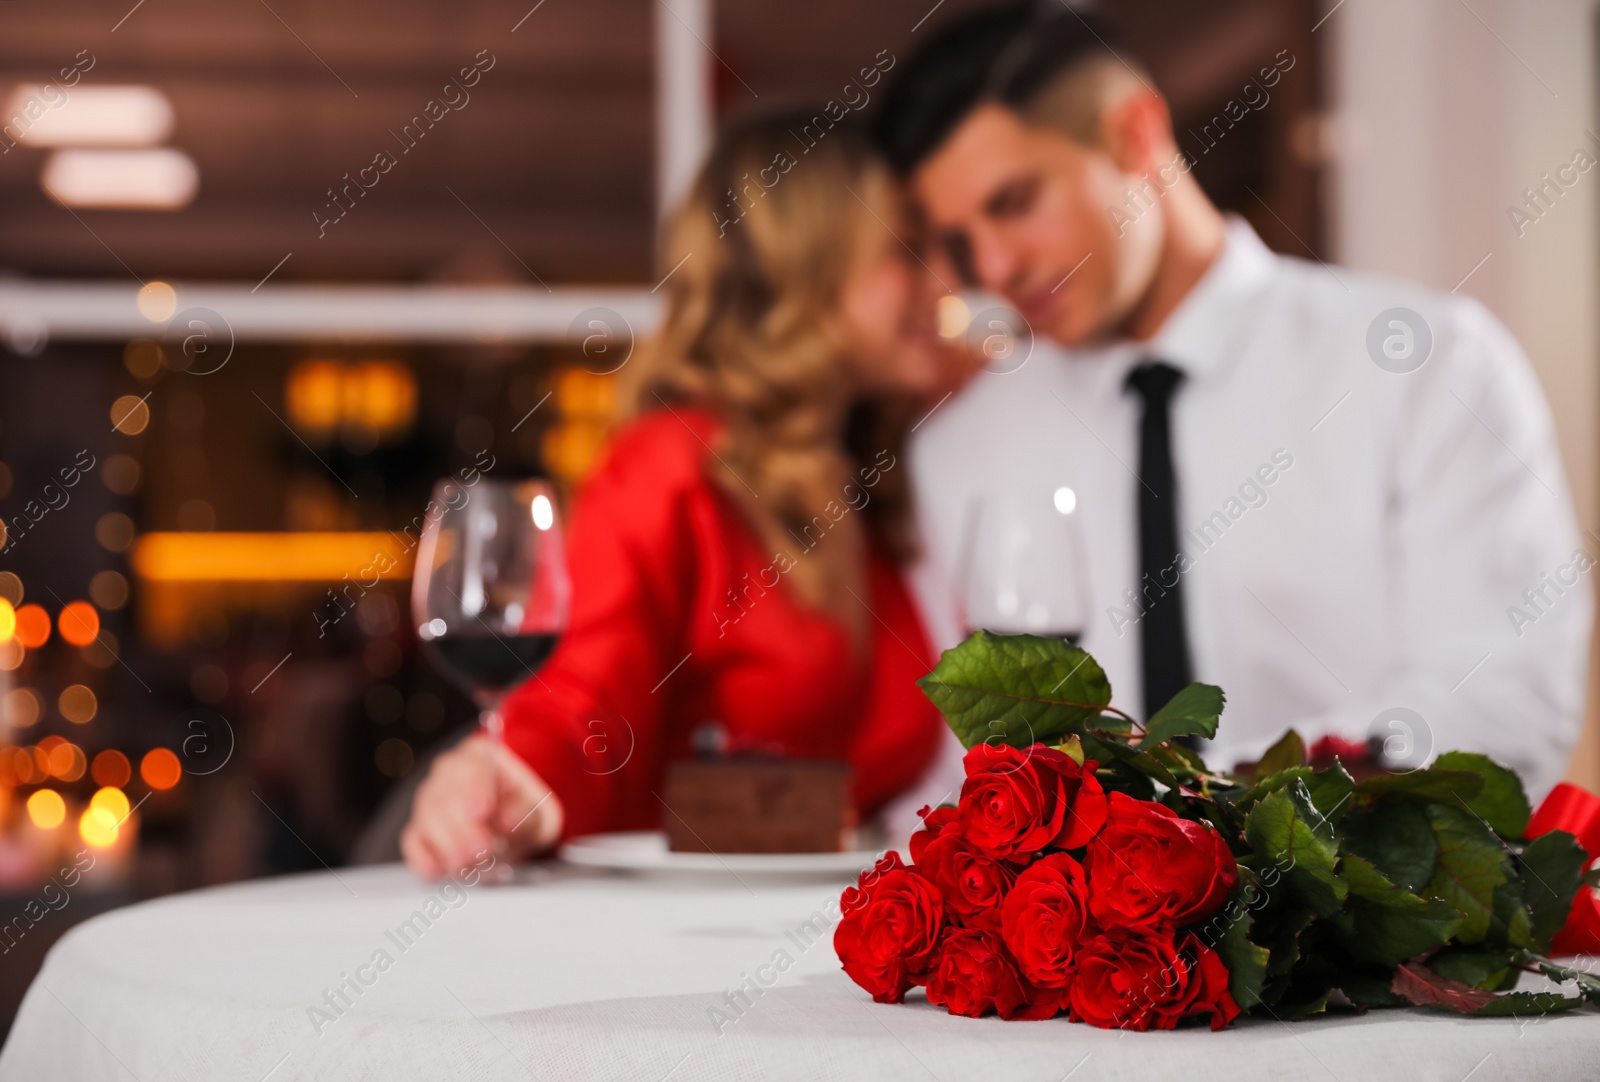 Photo of Lovely couple celebrating Valentine's day in restaurant, focus on table with red roses